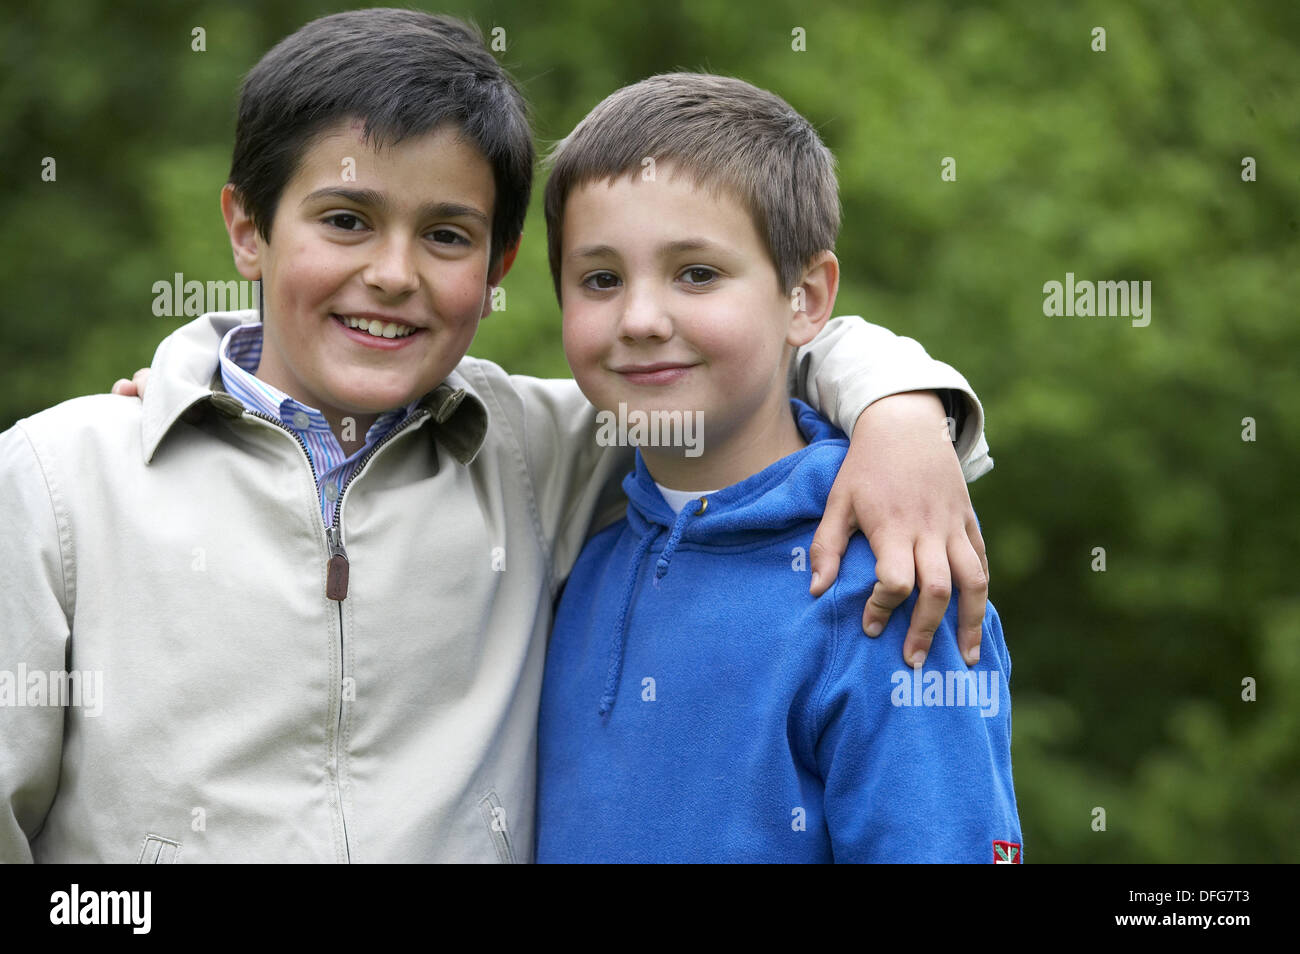 9 years old boys, cousins Stock Photo - Alamy